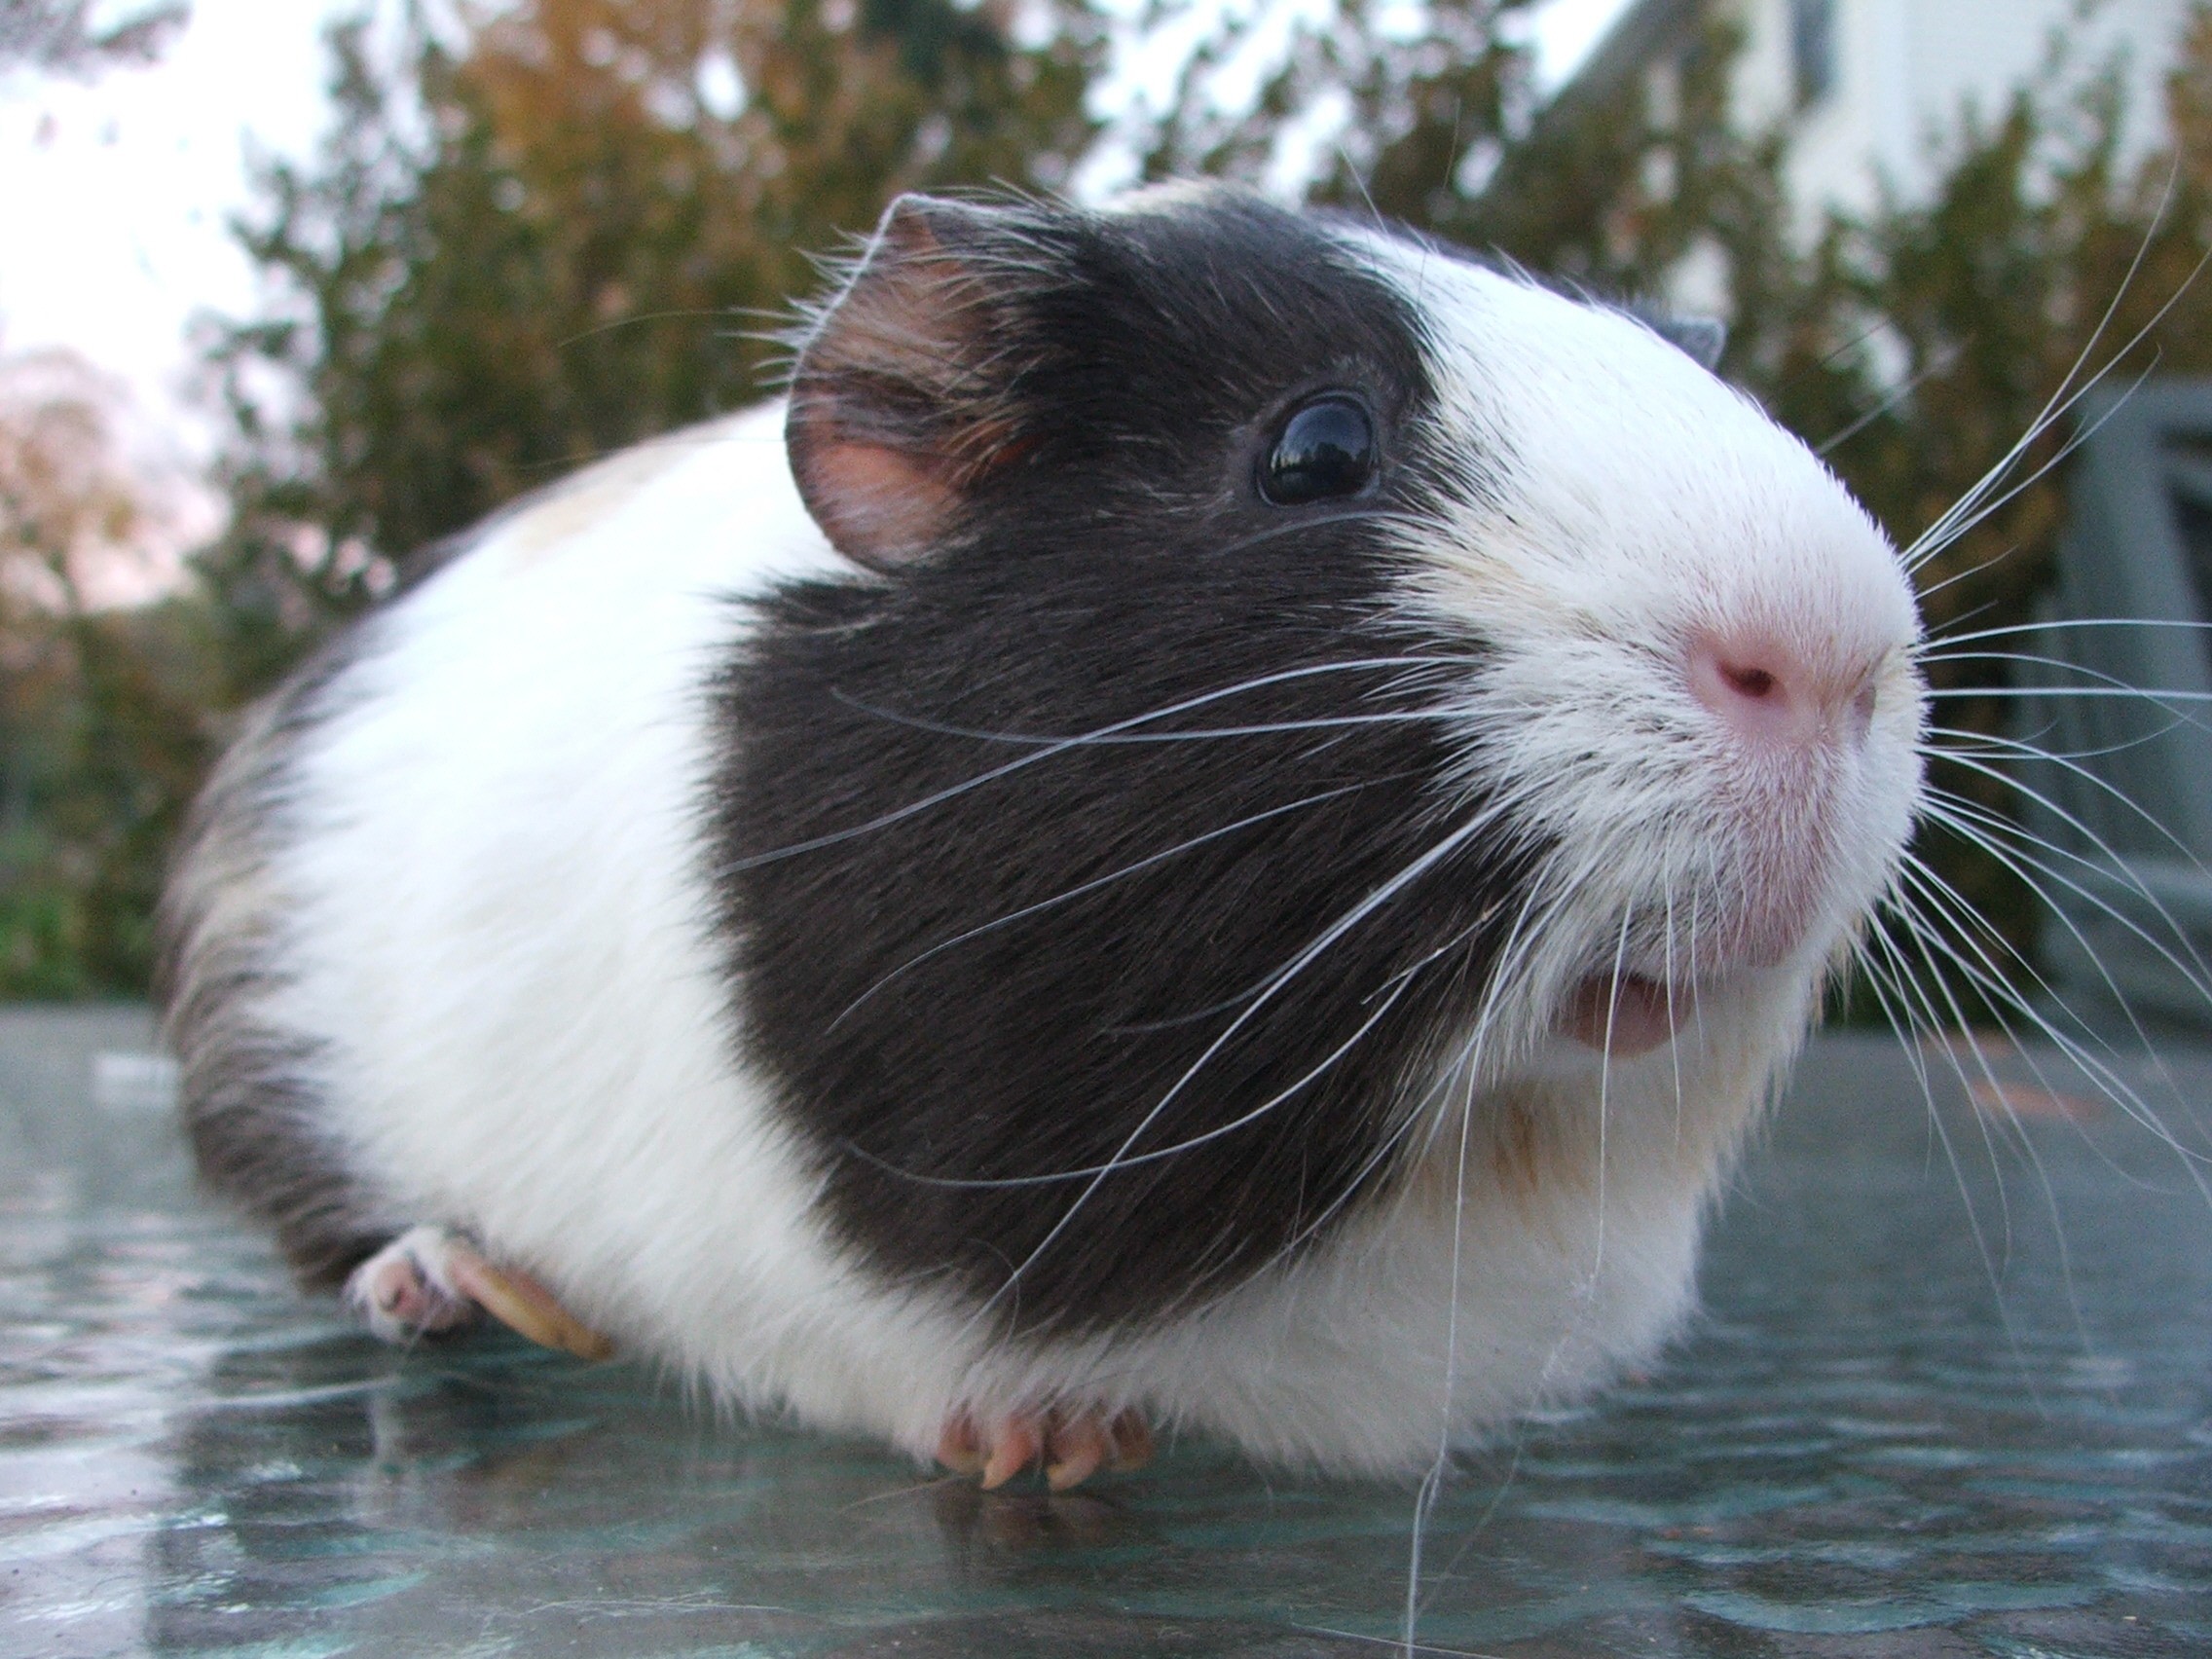 What family is the guinea pig related to?